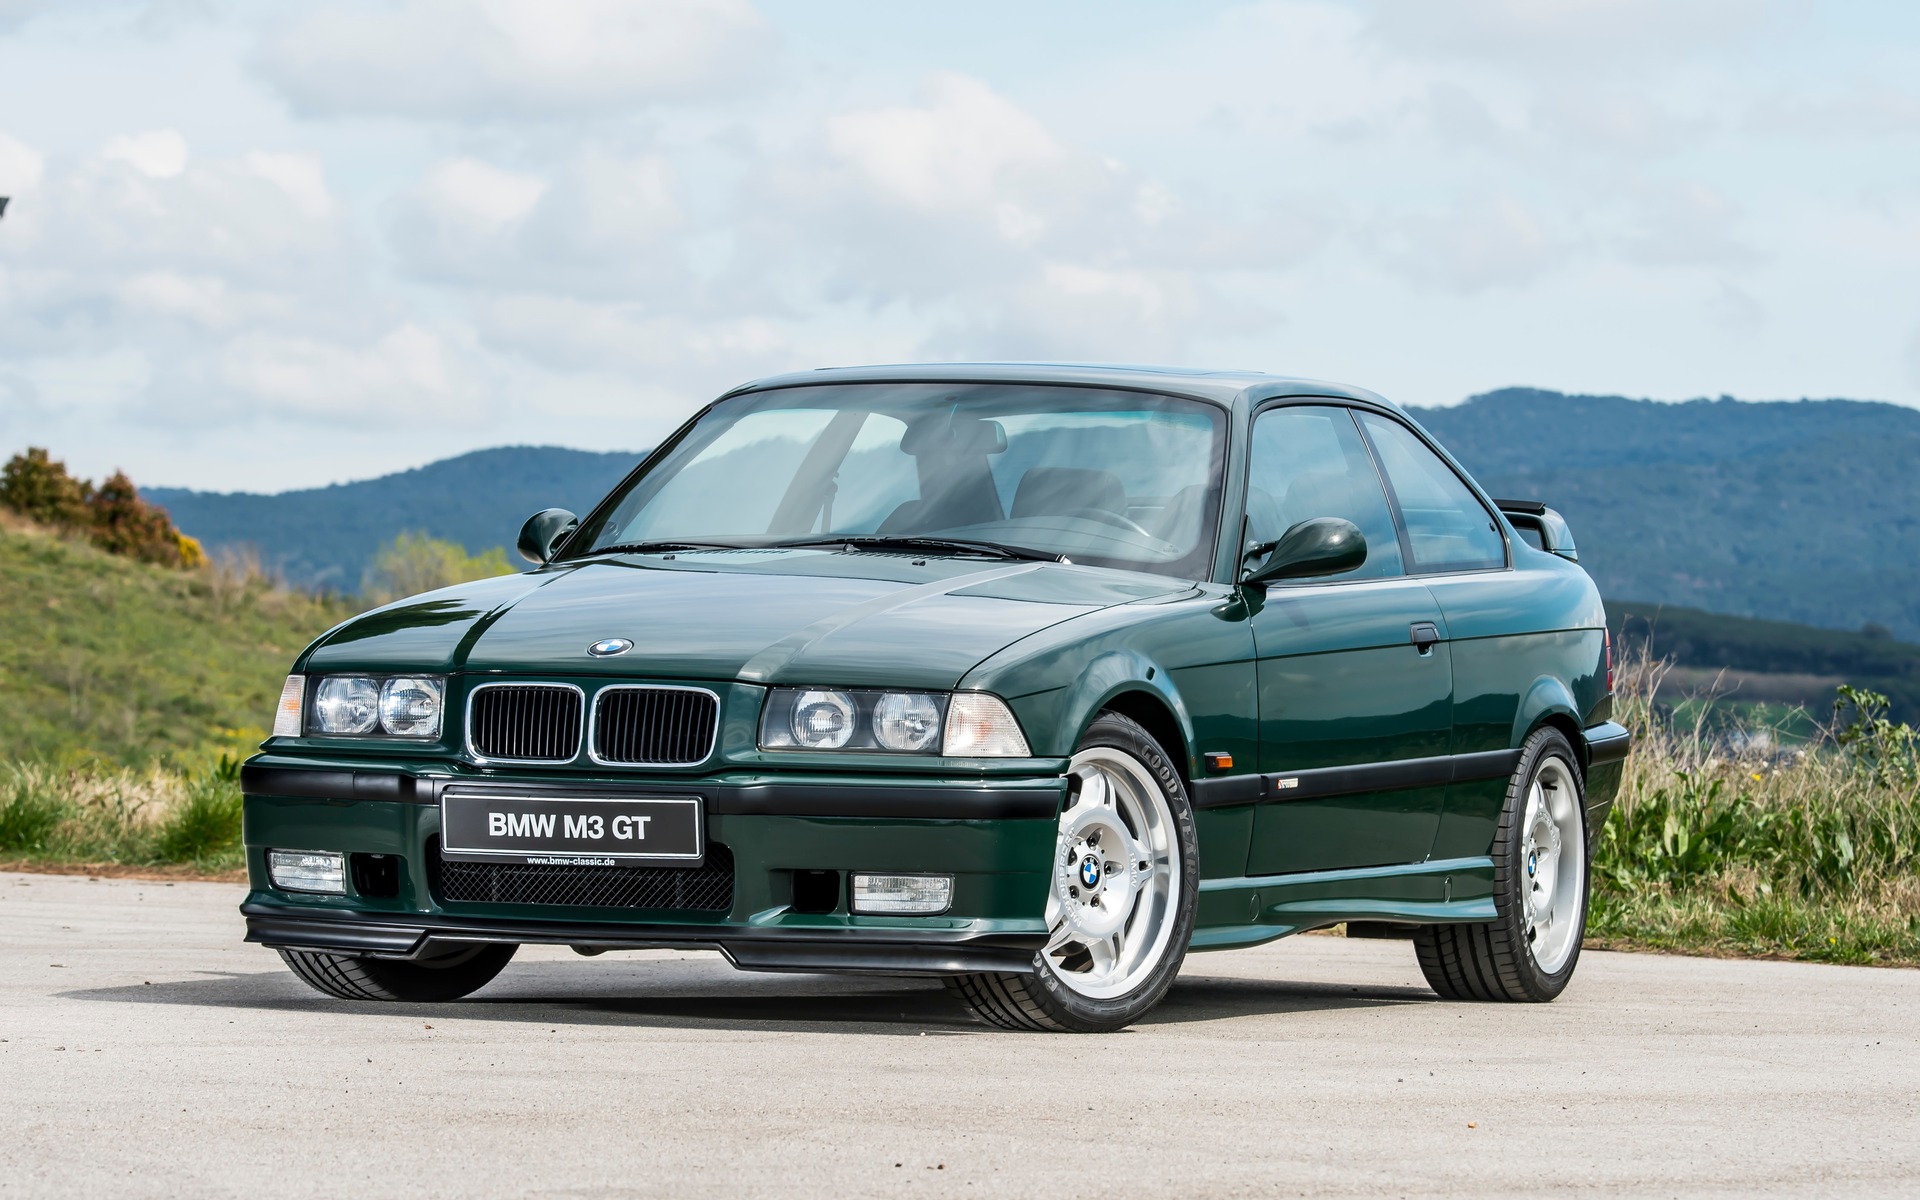 The first upgraded M3, the E36 GT